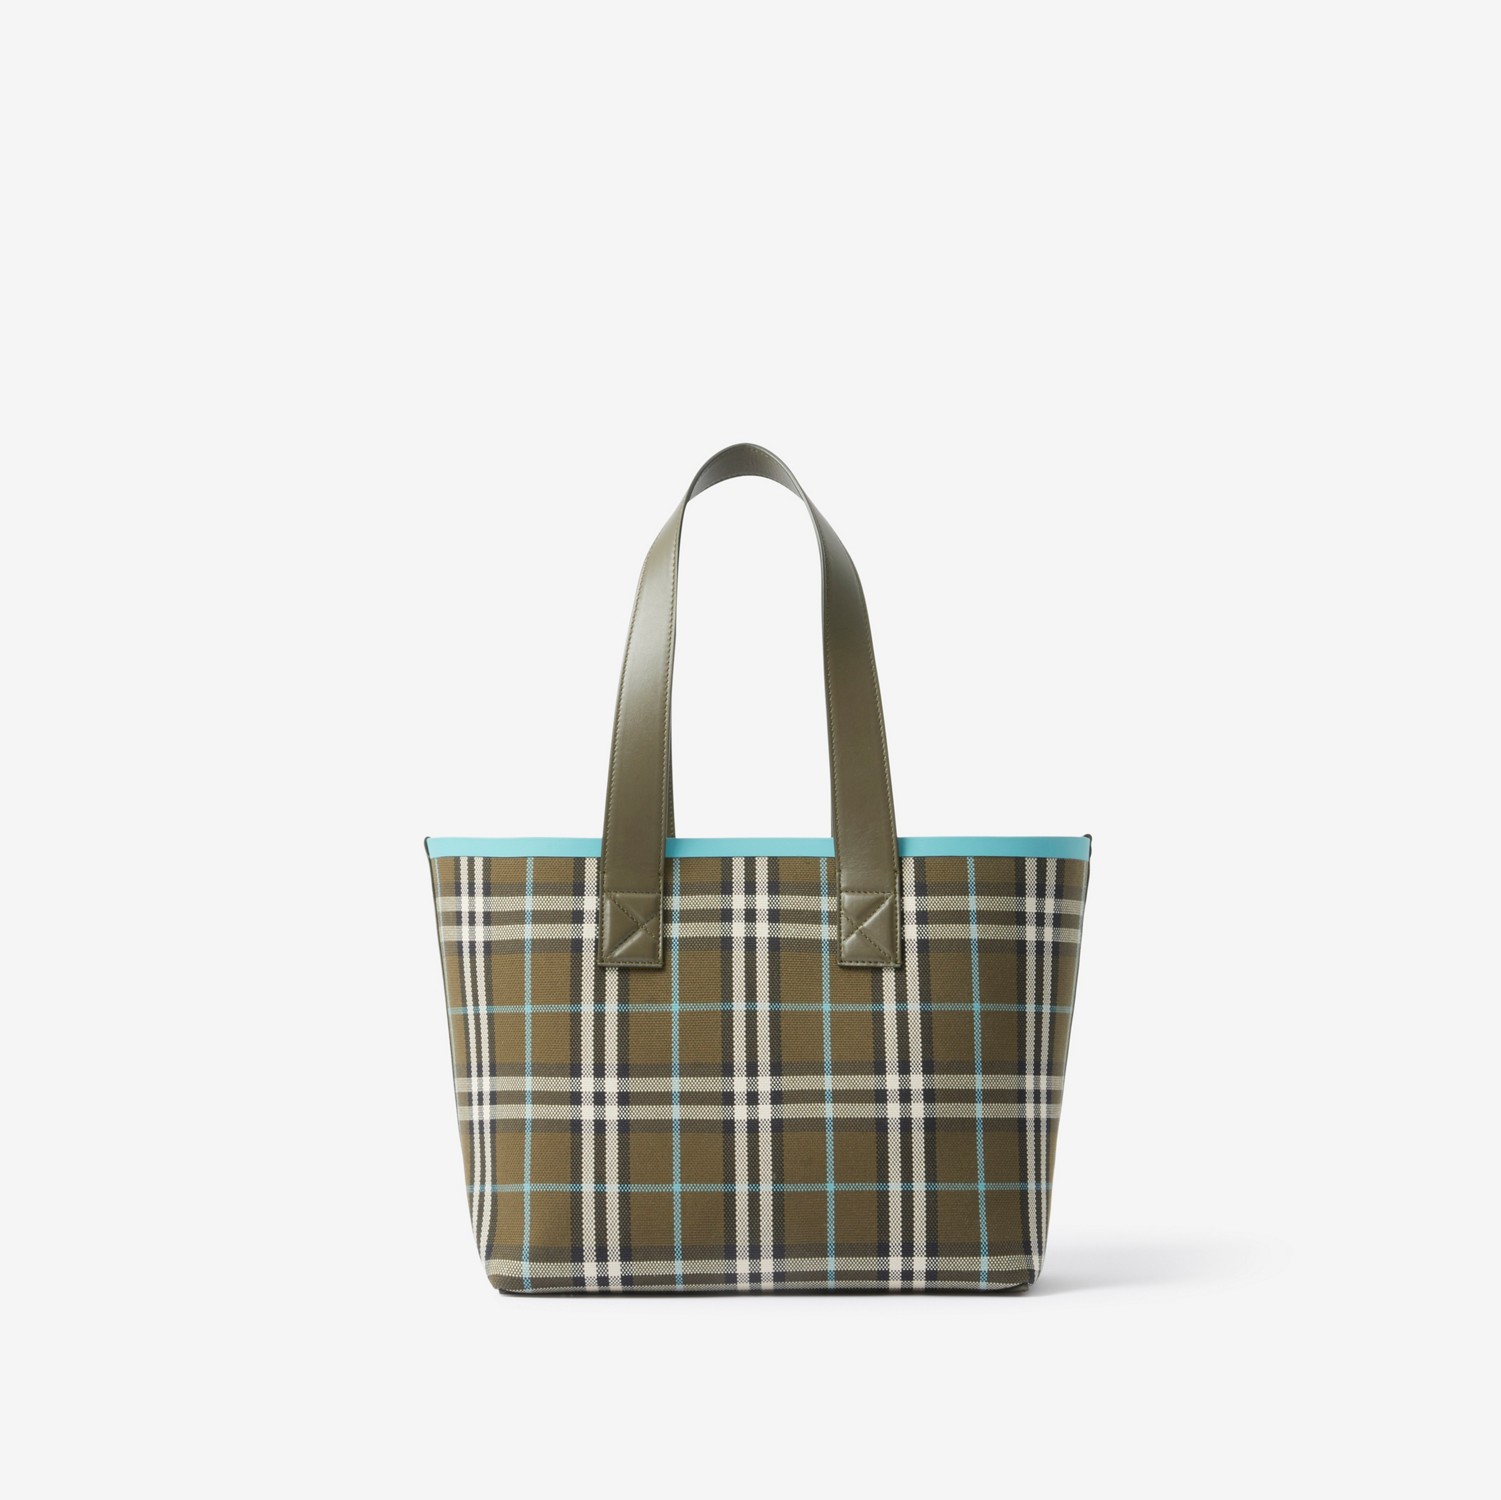 Small London Tote Bag in Olive Green - Women | Burberry® Official